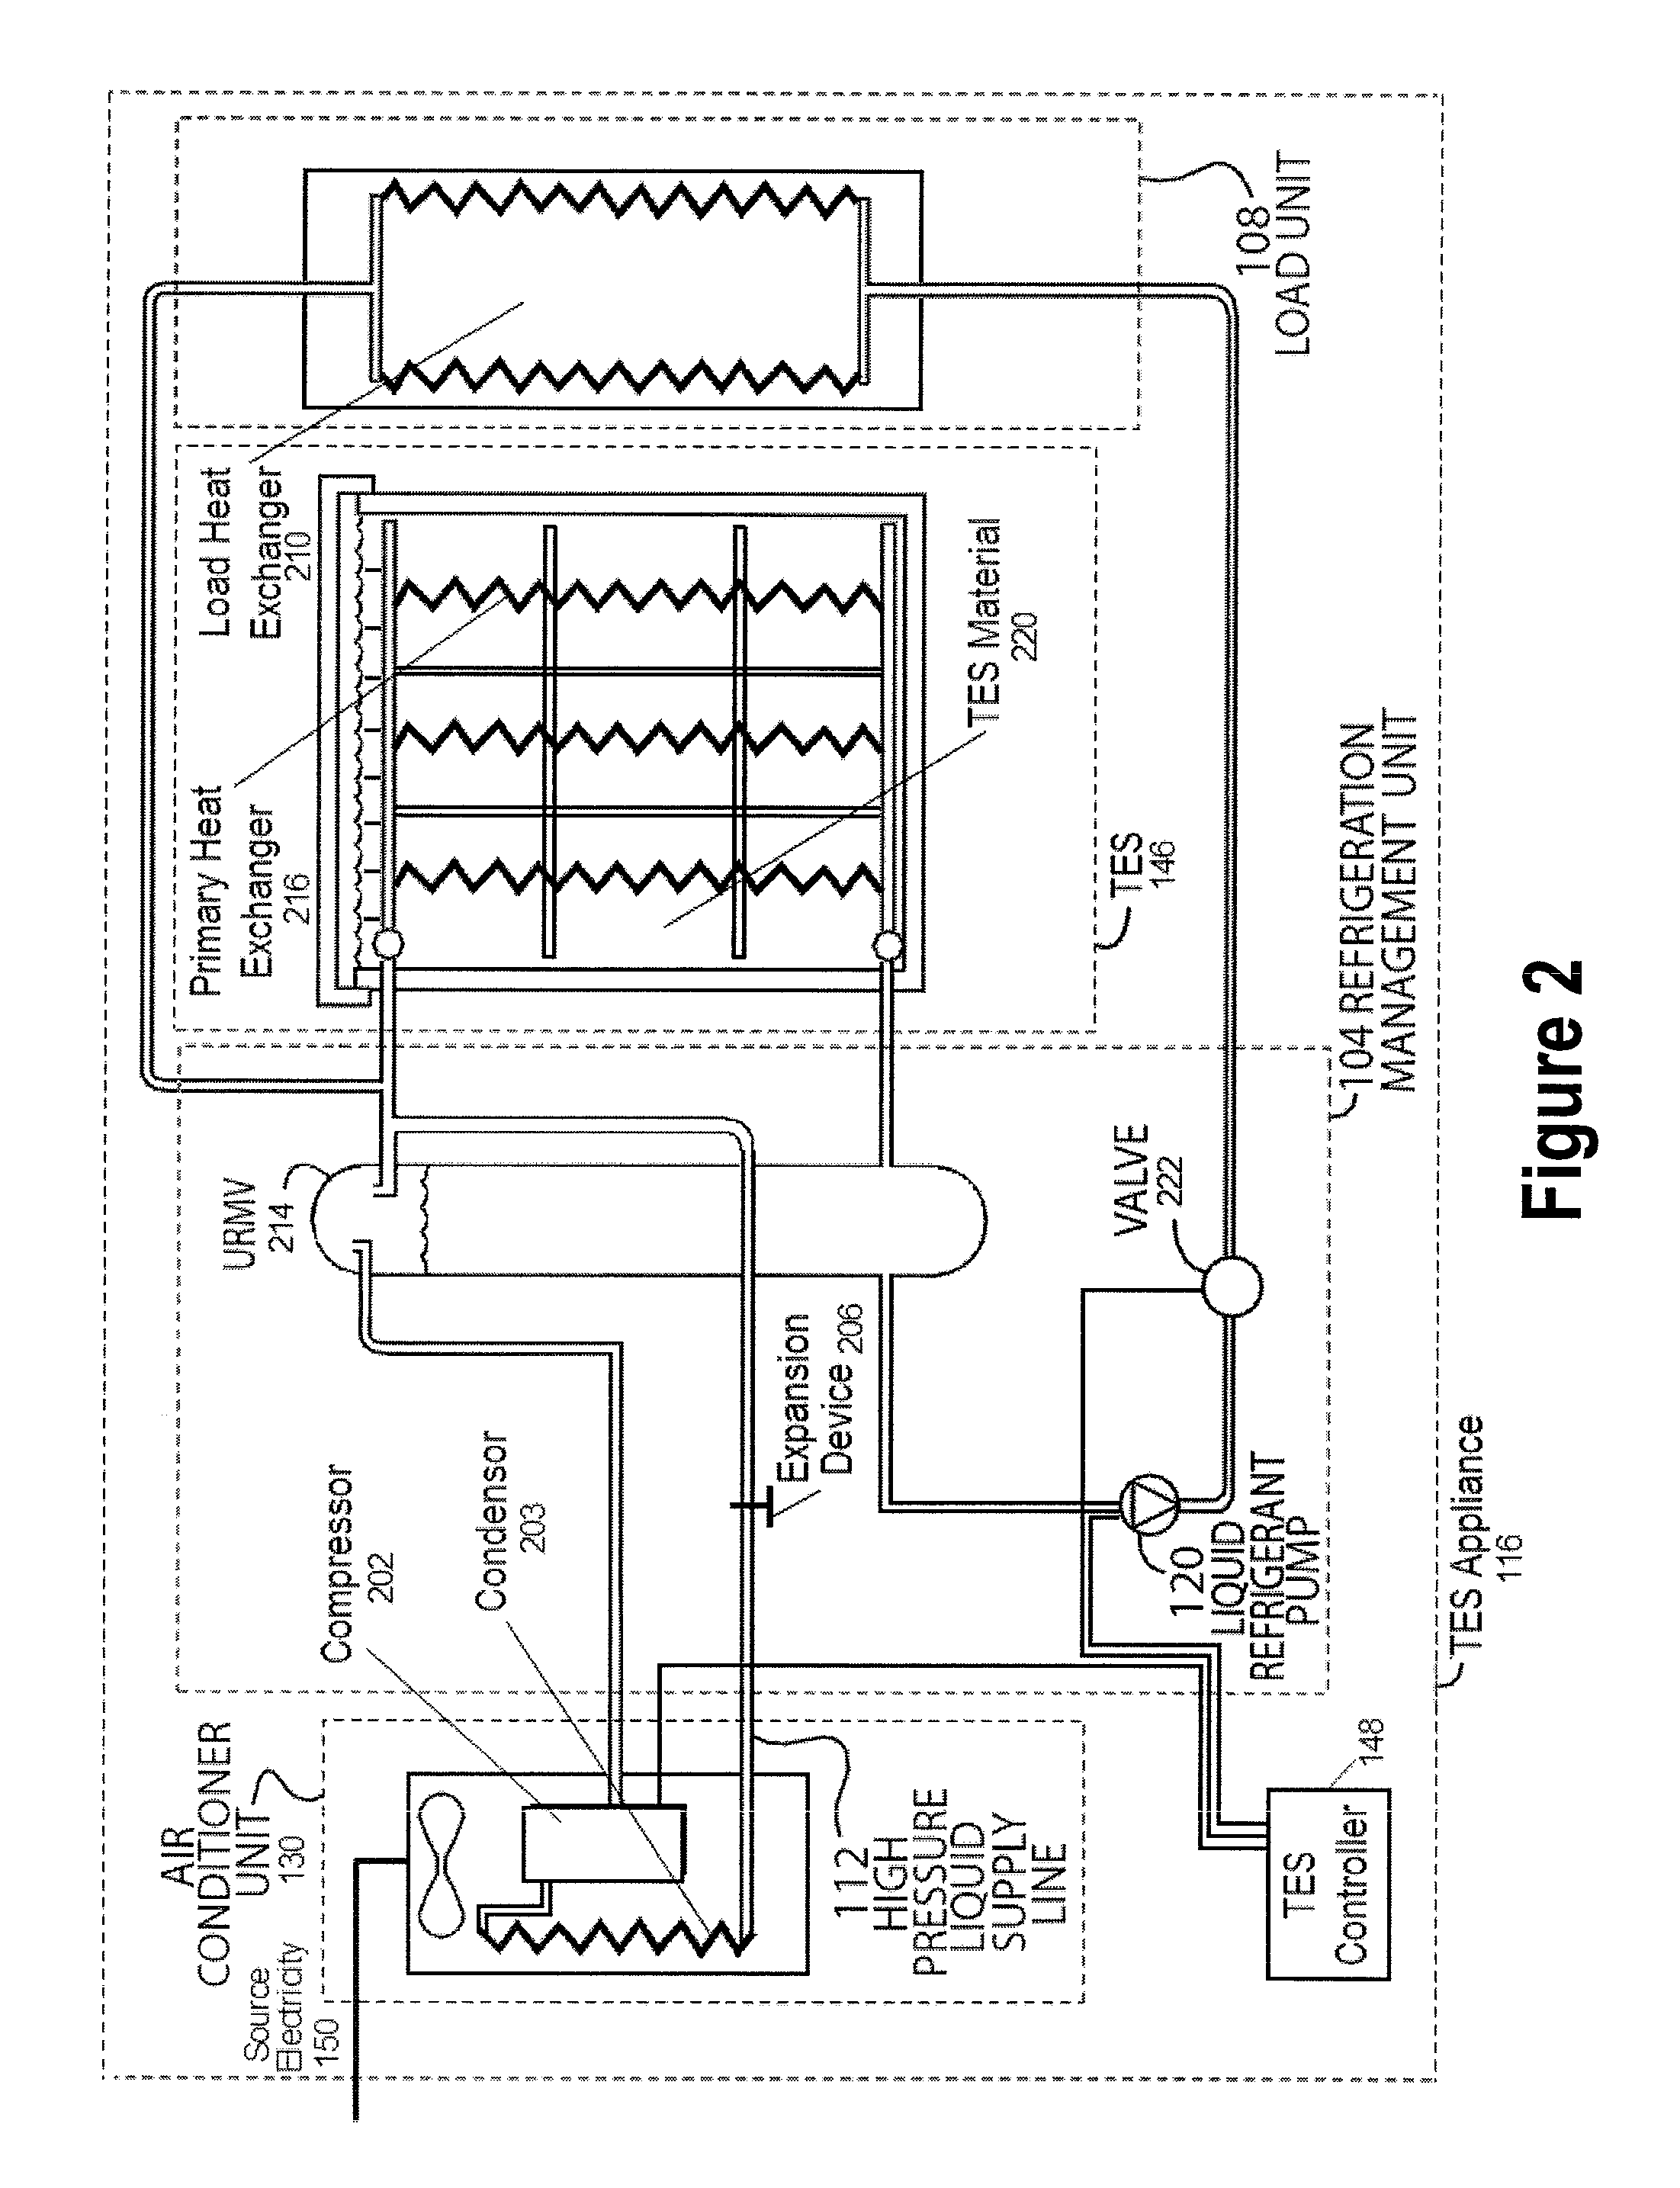 System and method for improving grid efficiency utilizing statistical distribution control